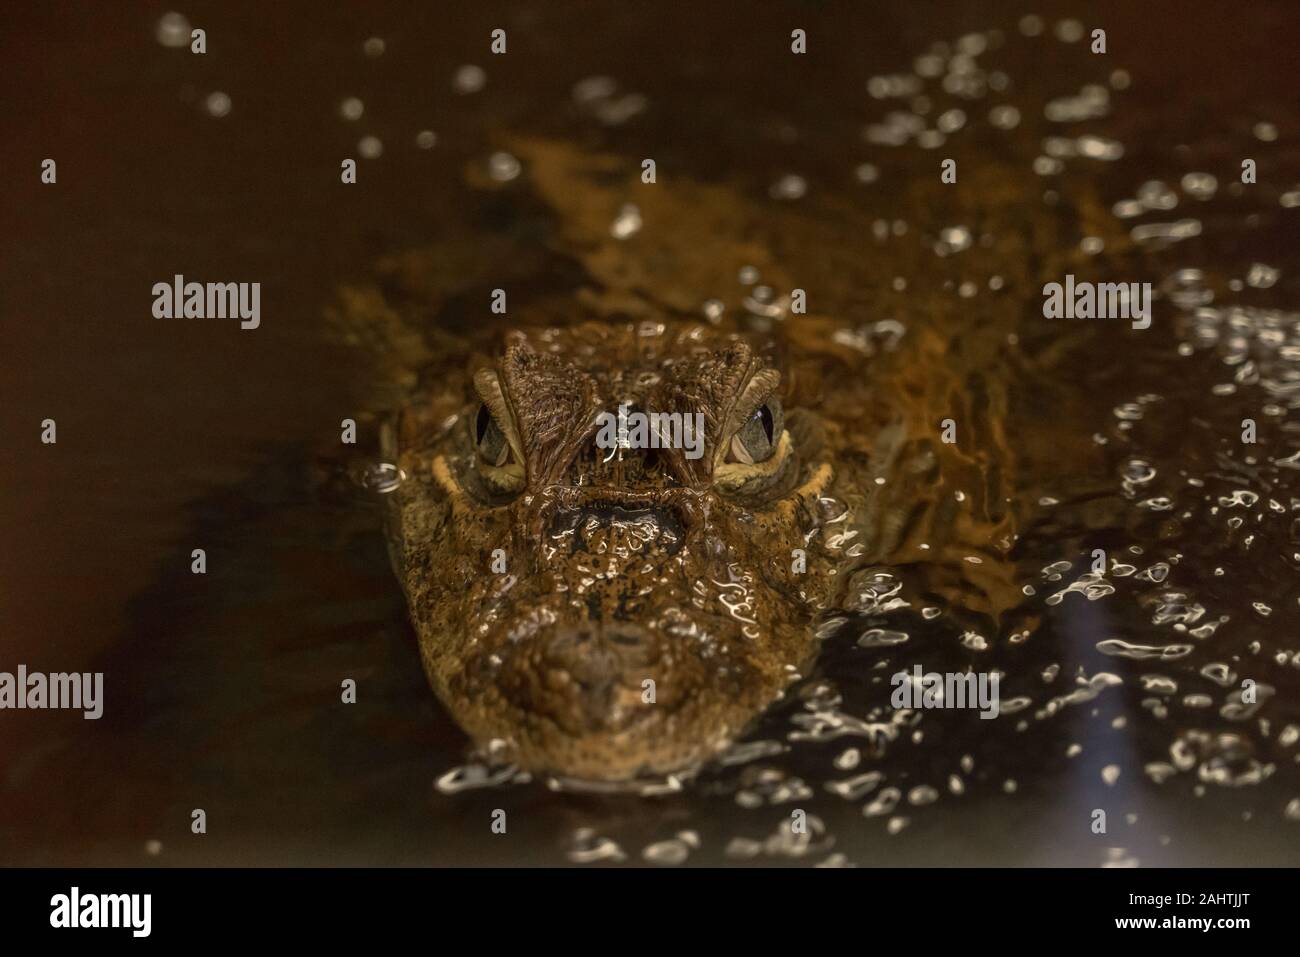 close up of an Alligator with head above water Stock Photo